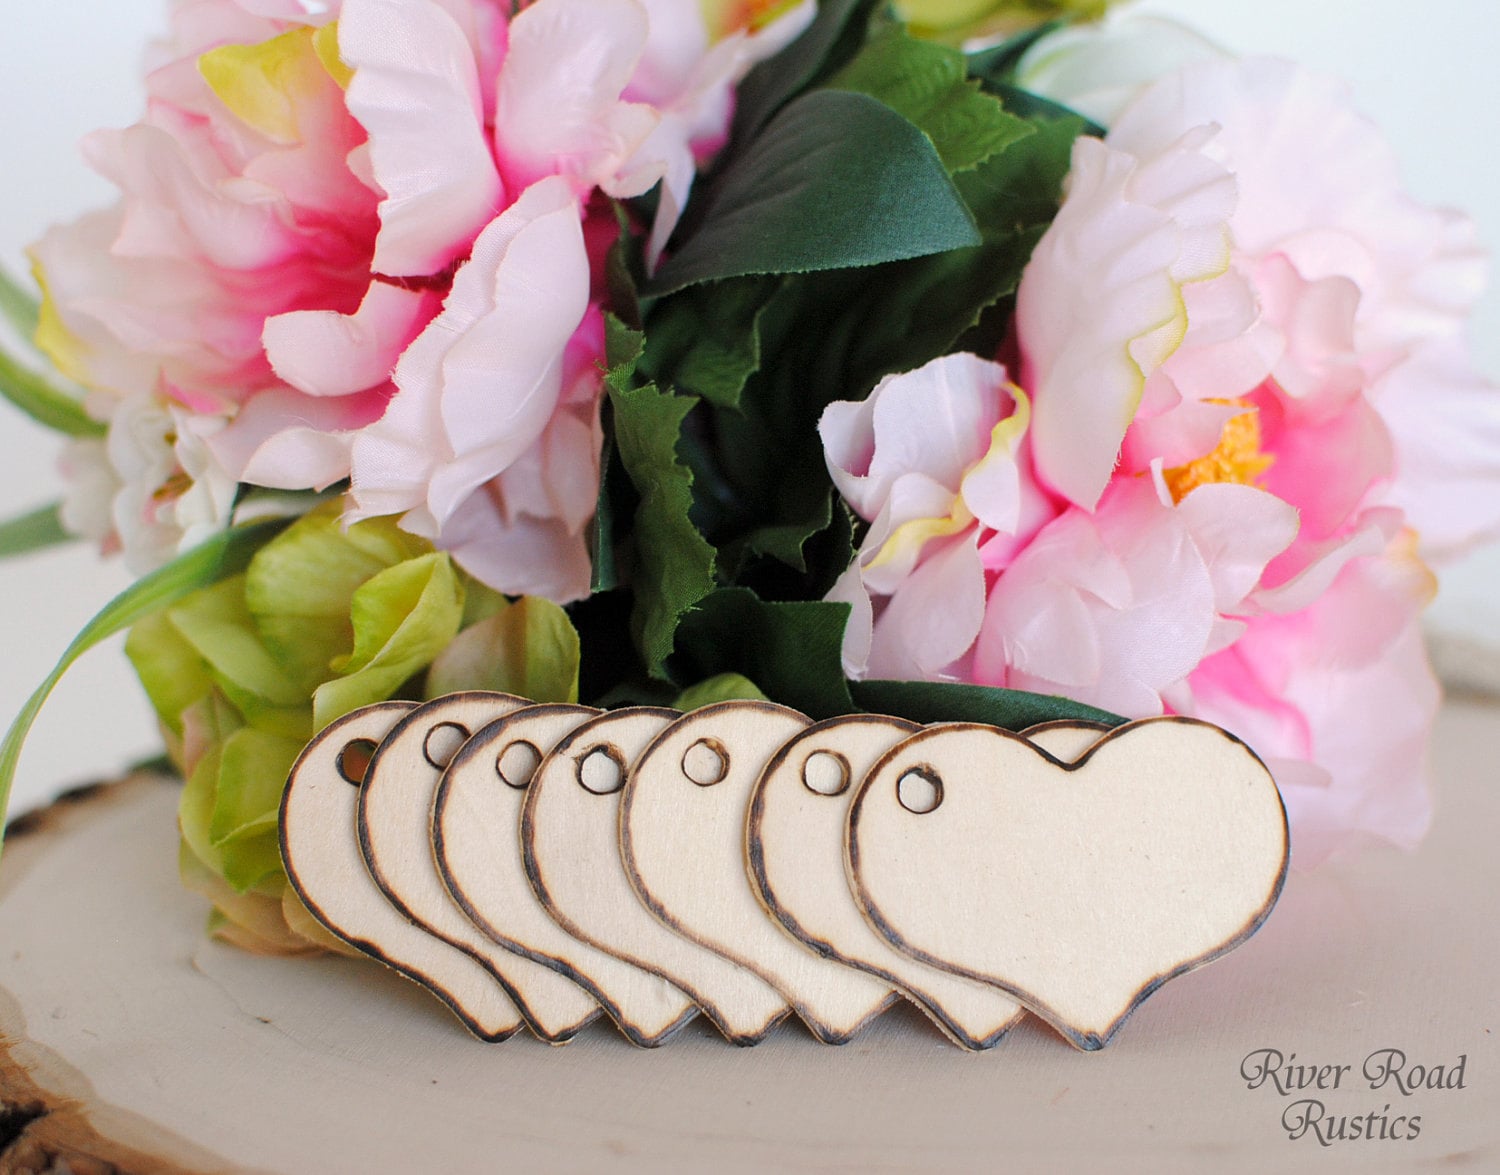 Rustic Wood Heart Tags(Set Of 12) for your Wishing Tree, Escort Cards, Place Cards, Favors, Gifts, Etc.